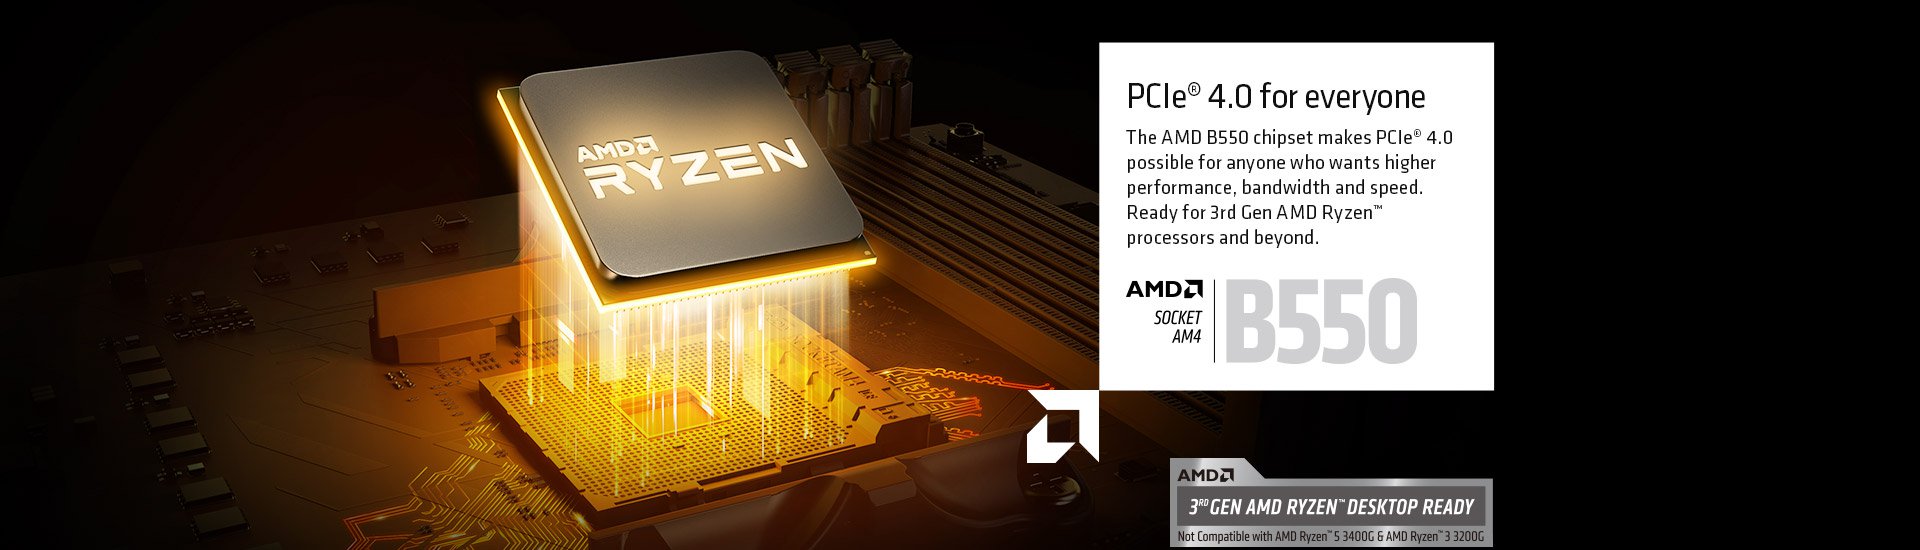 AMD Support PCIE 4